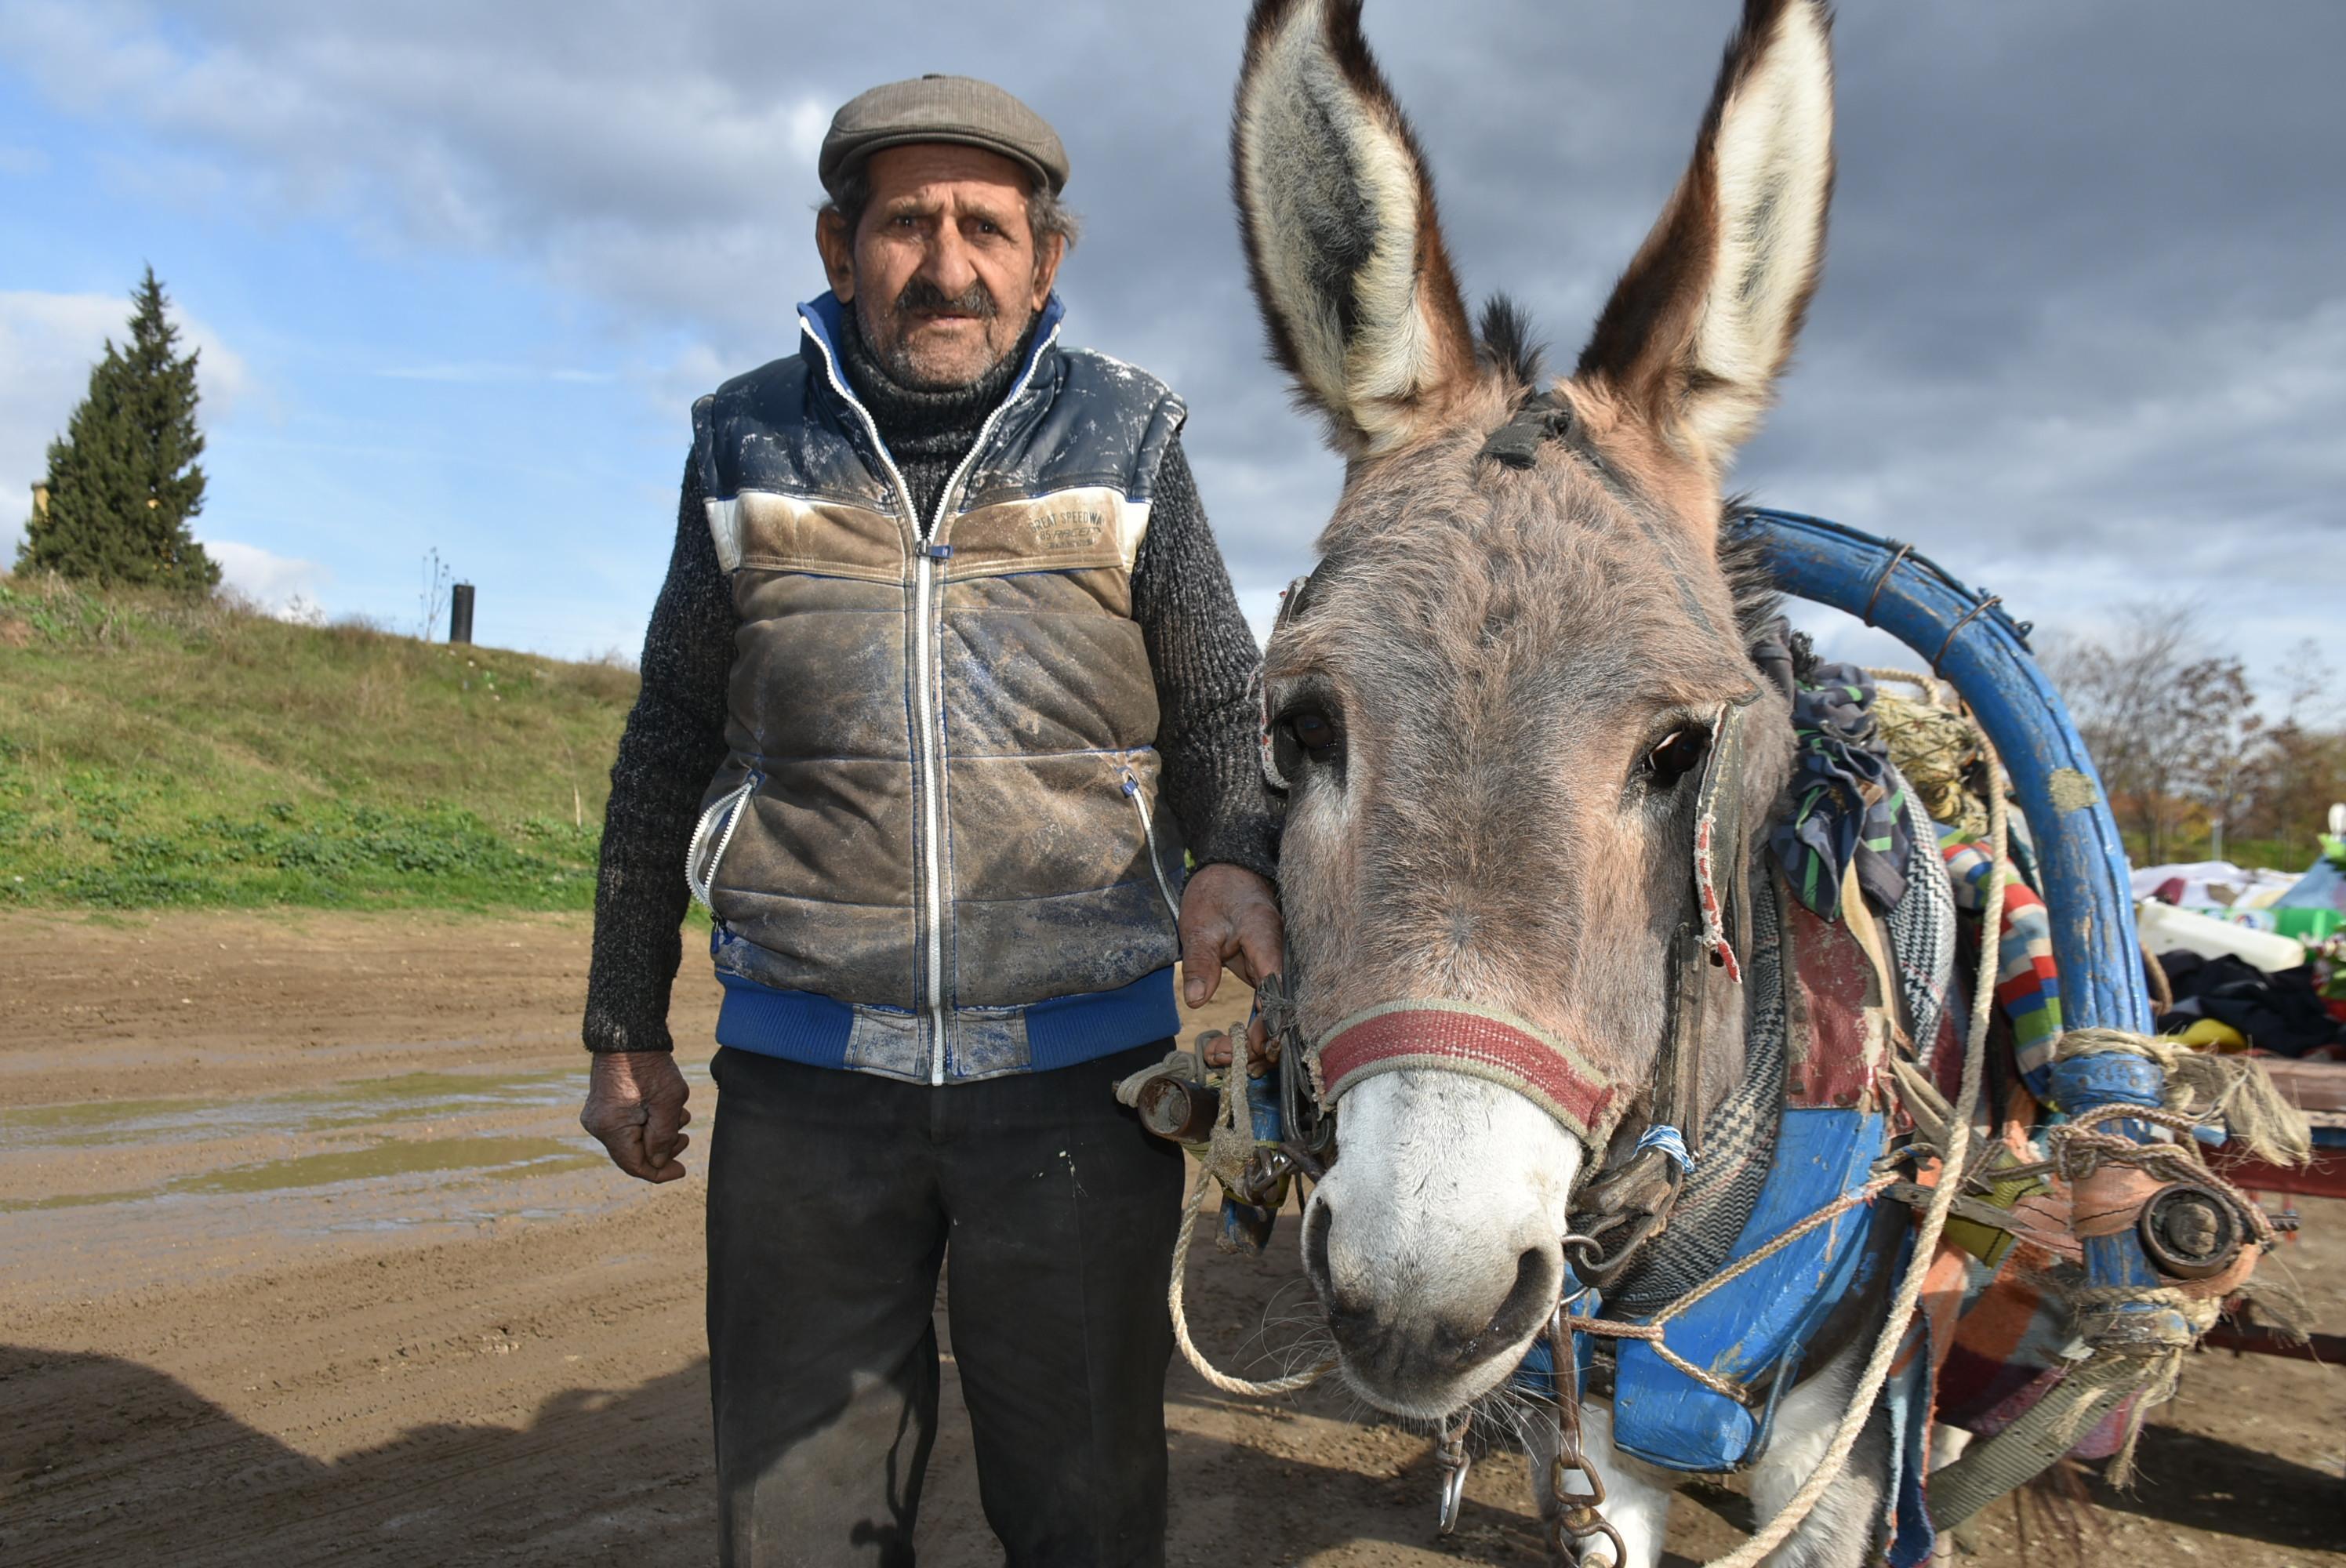 86-yeard old makes living by collecting scrap with his donkey and dog